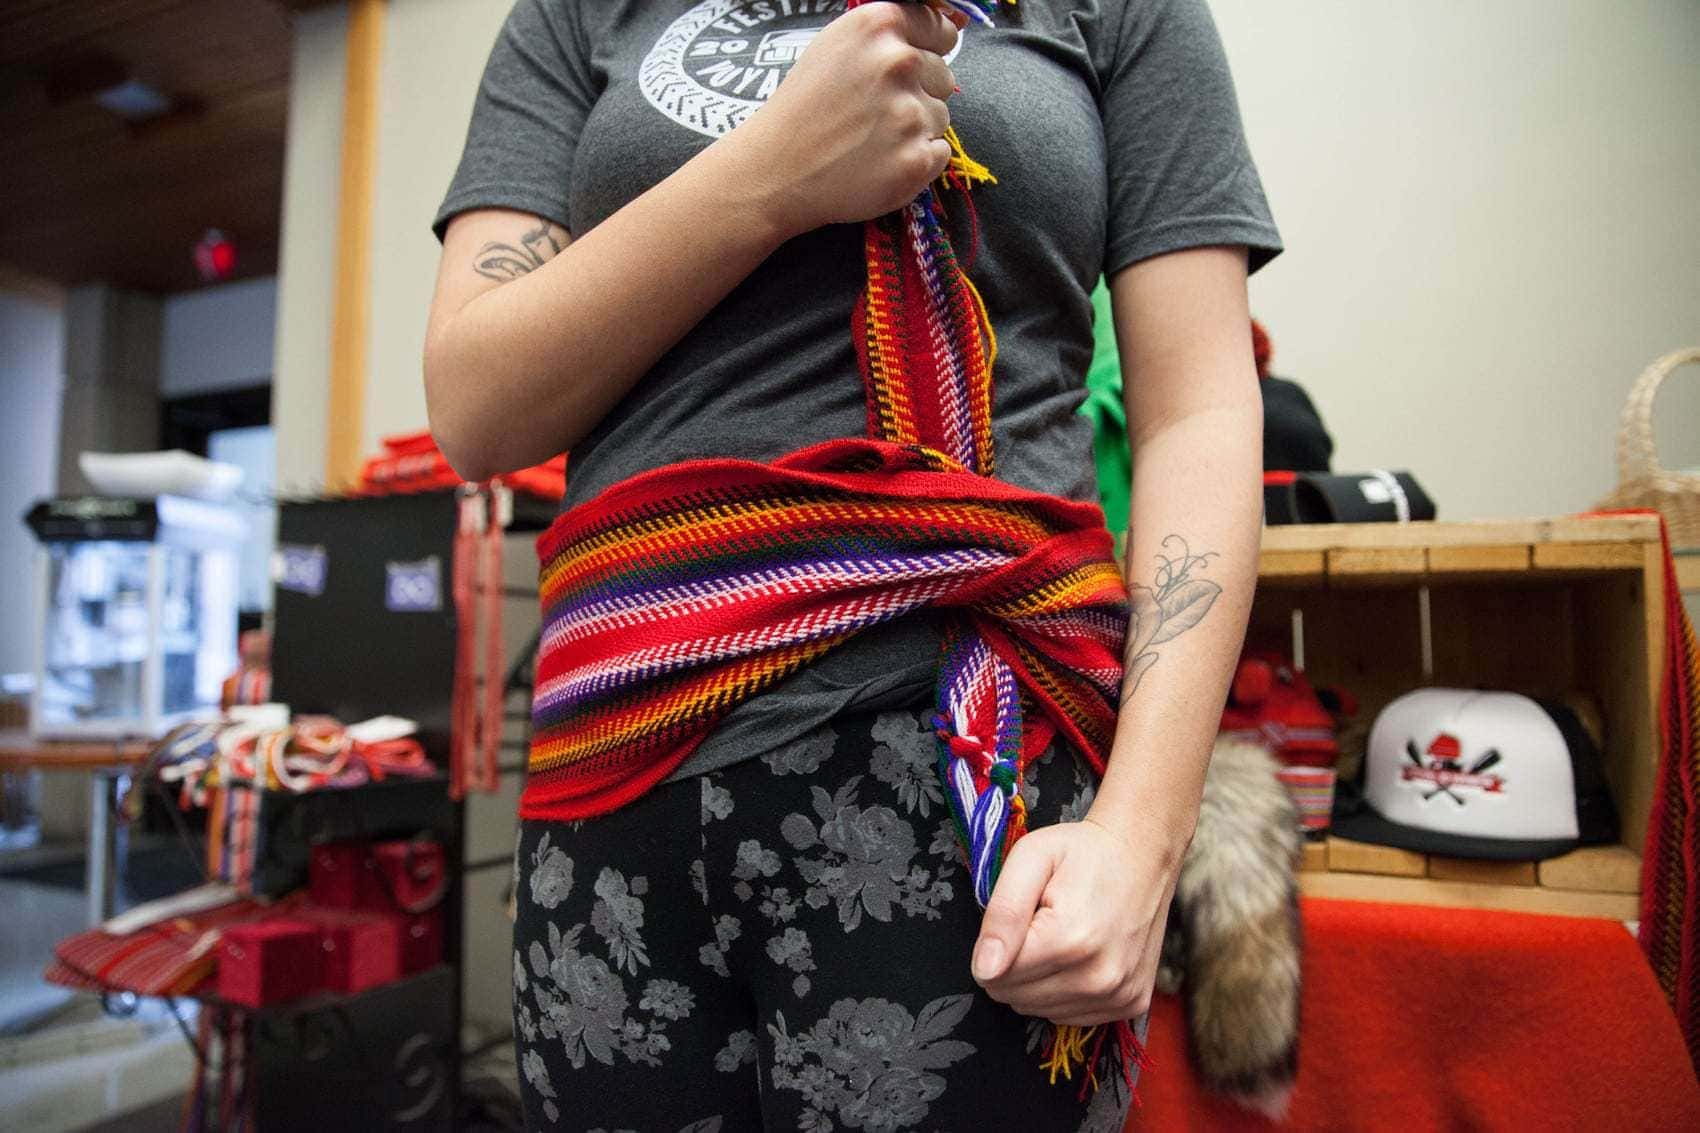 Featured image for “6 steps to tying your sash like a real voyageur”